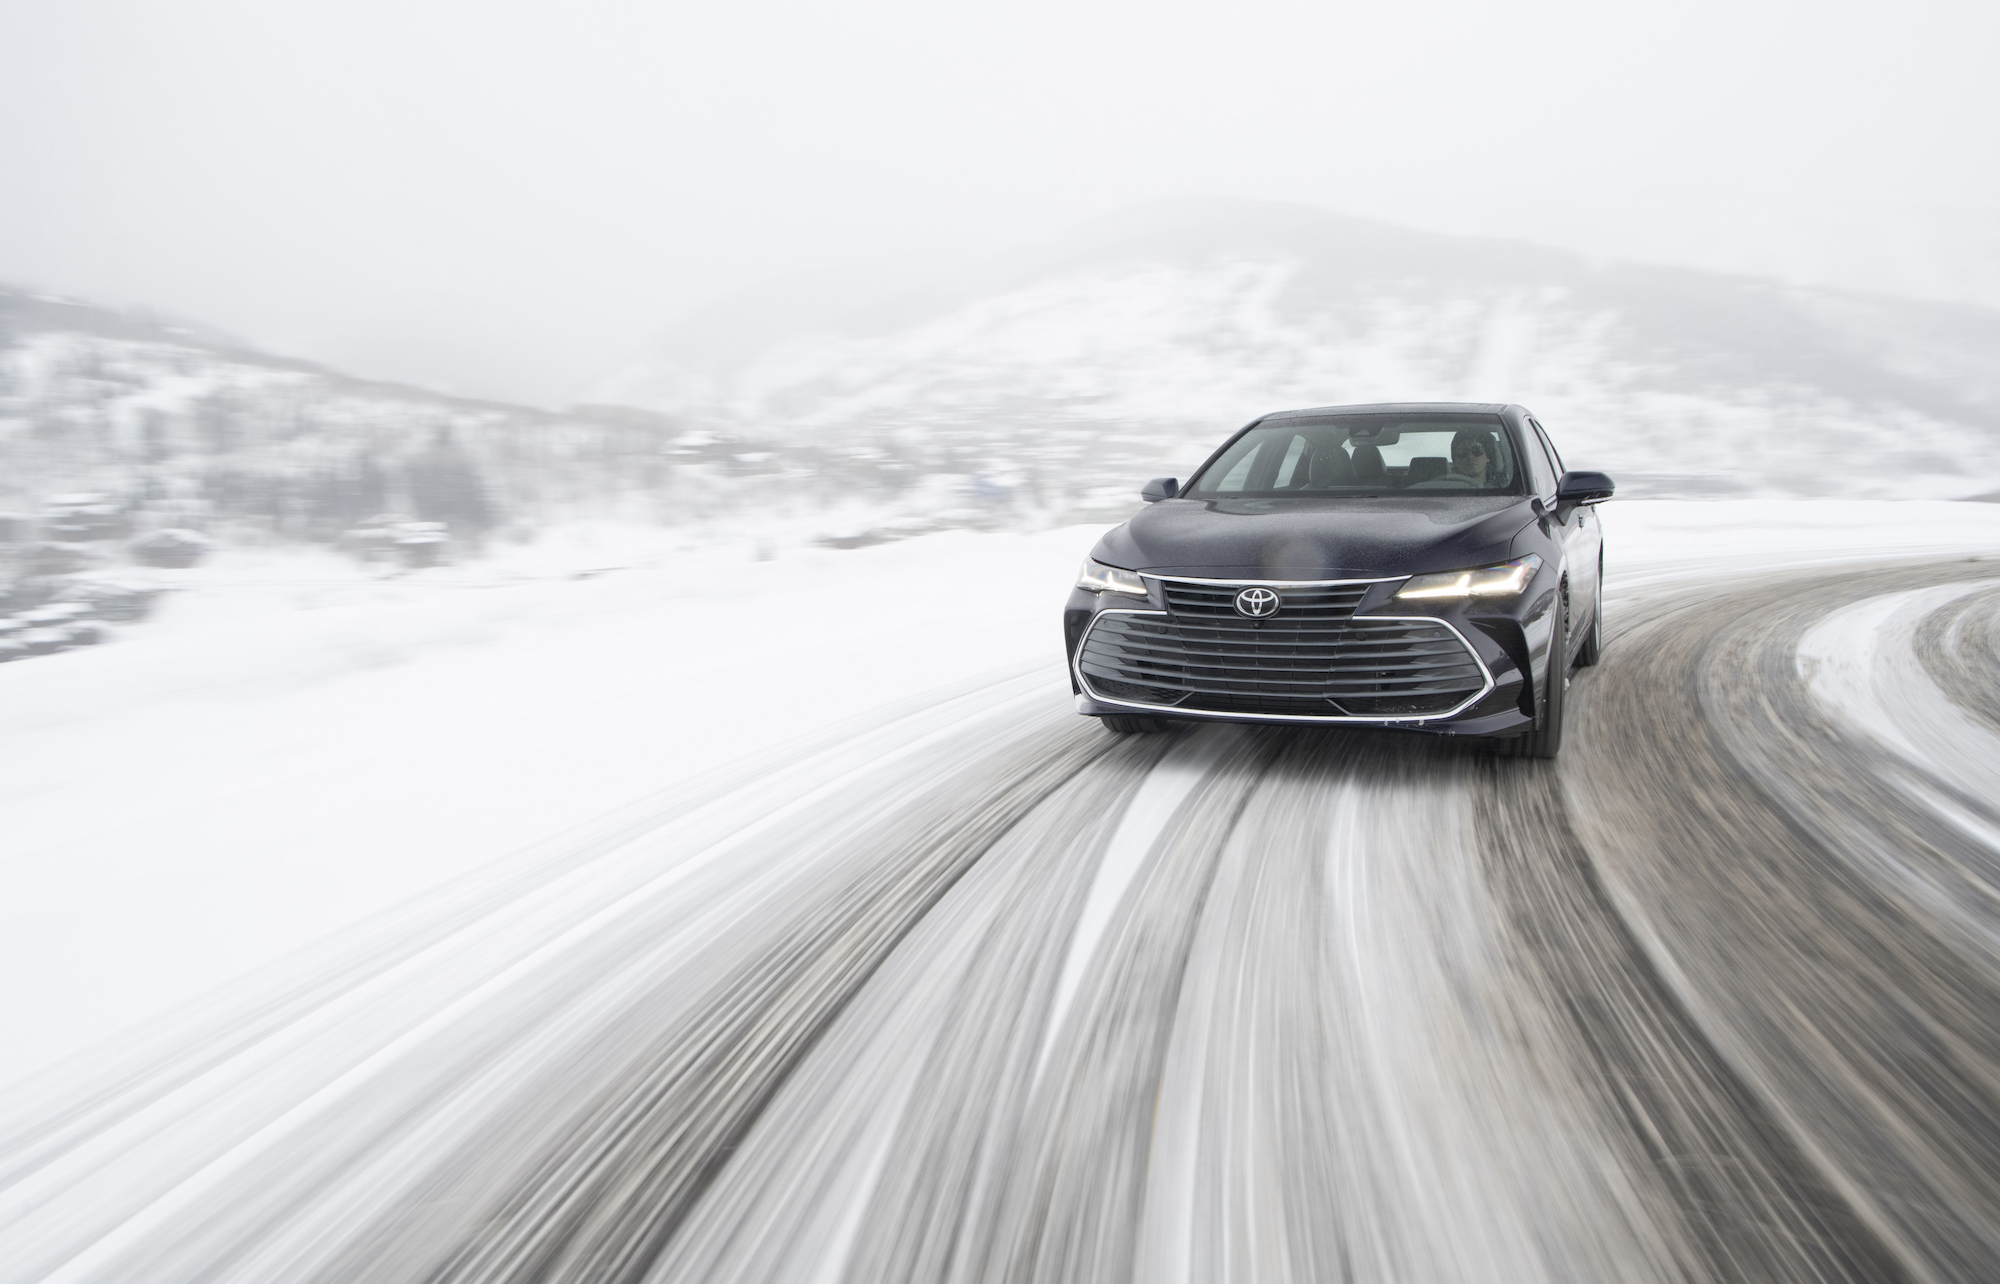 A dark-colored all-wheel-drive hybrid 2021 Toyota Avalon full-size sedan traveling on a snow-covered mountain road